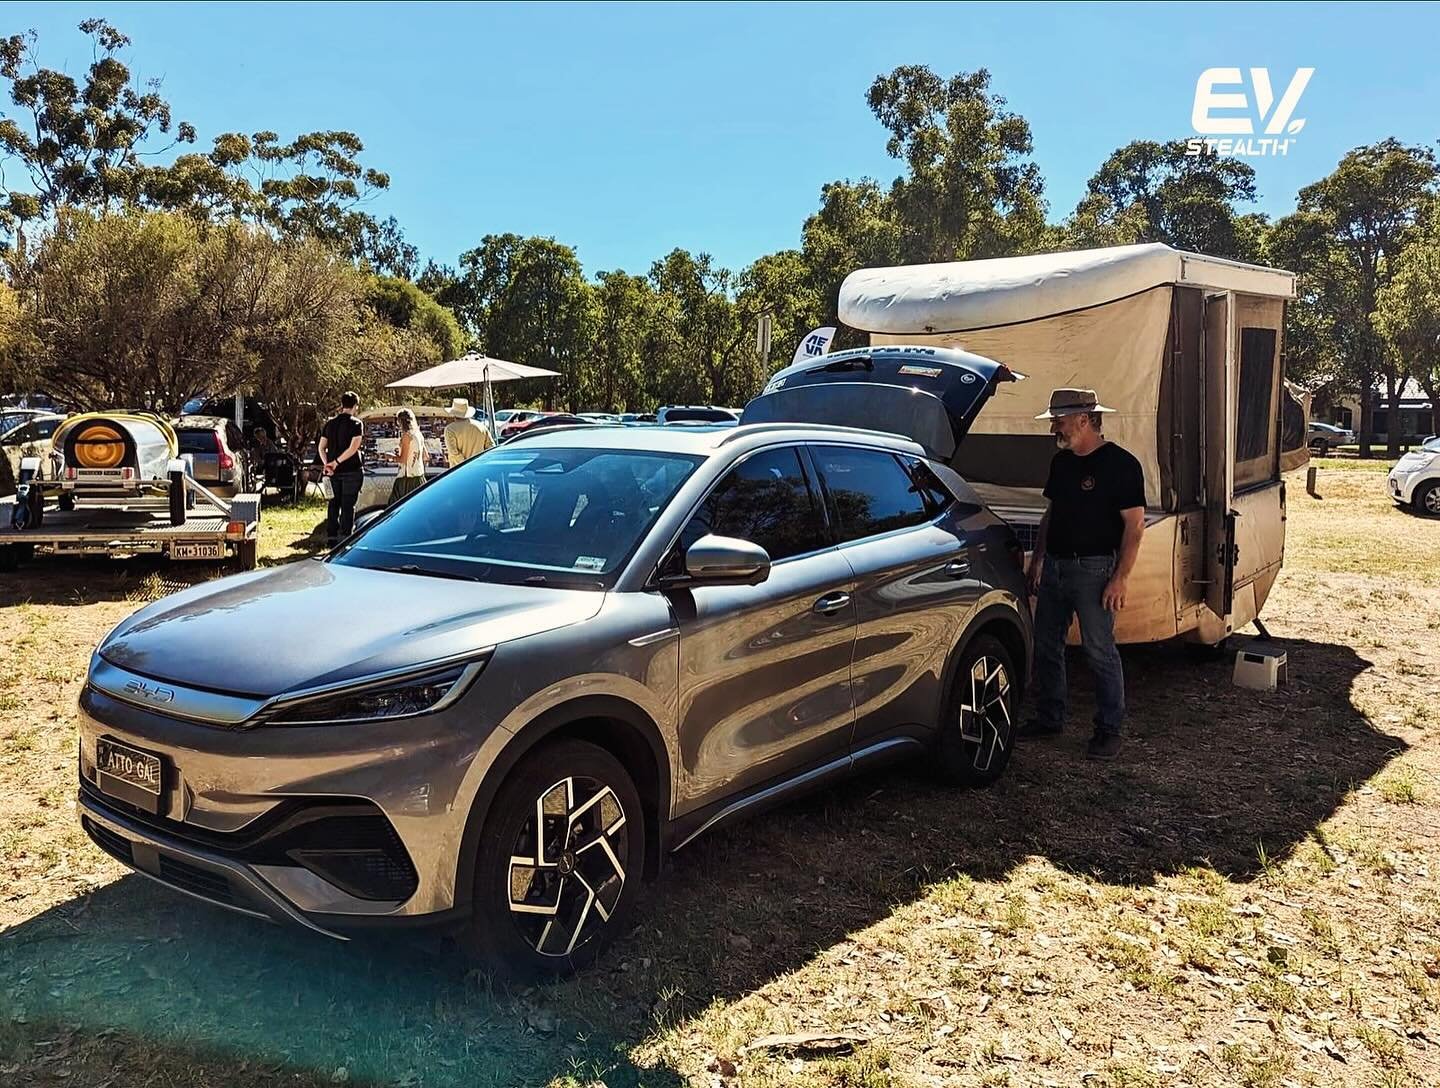 Expanding your EV experience. Yes - the #bydatto3 can tow!
.
.
.
.
.
#evstealthsolutions #evtowing #evtowbars  #sustainabletransport #emobility #evstealth #electriccarsaustralia #electricvehicles #stealthmode #electricvehicletowbars #ev #sailing #evd